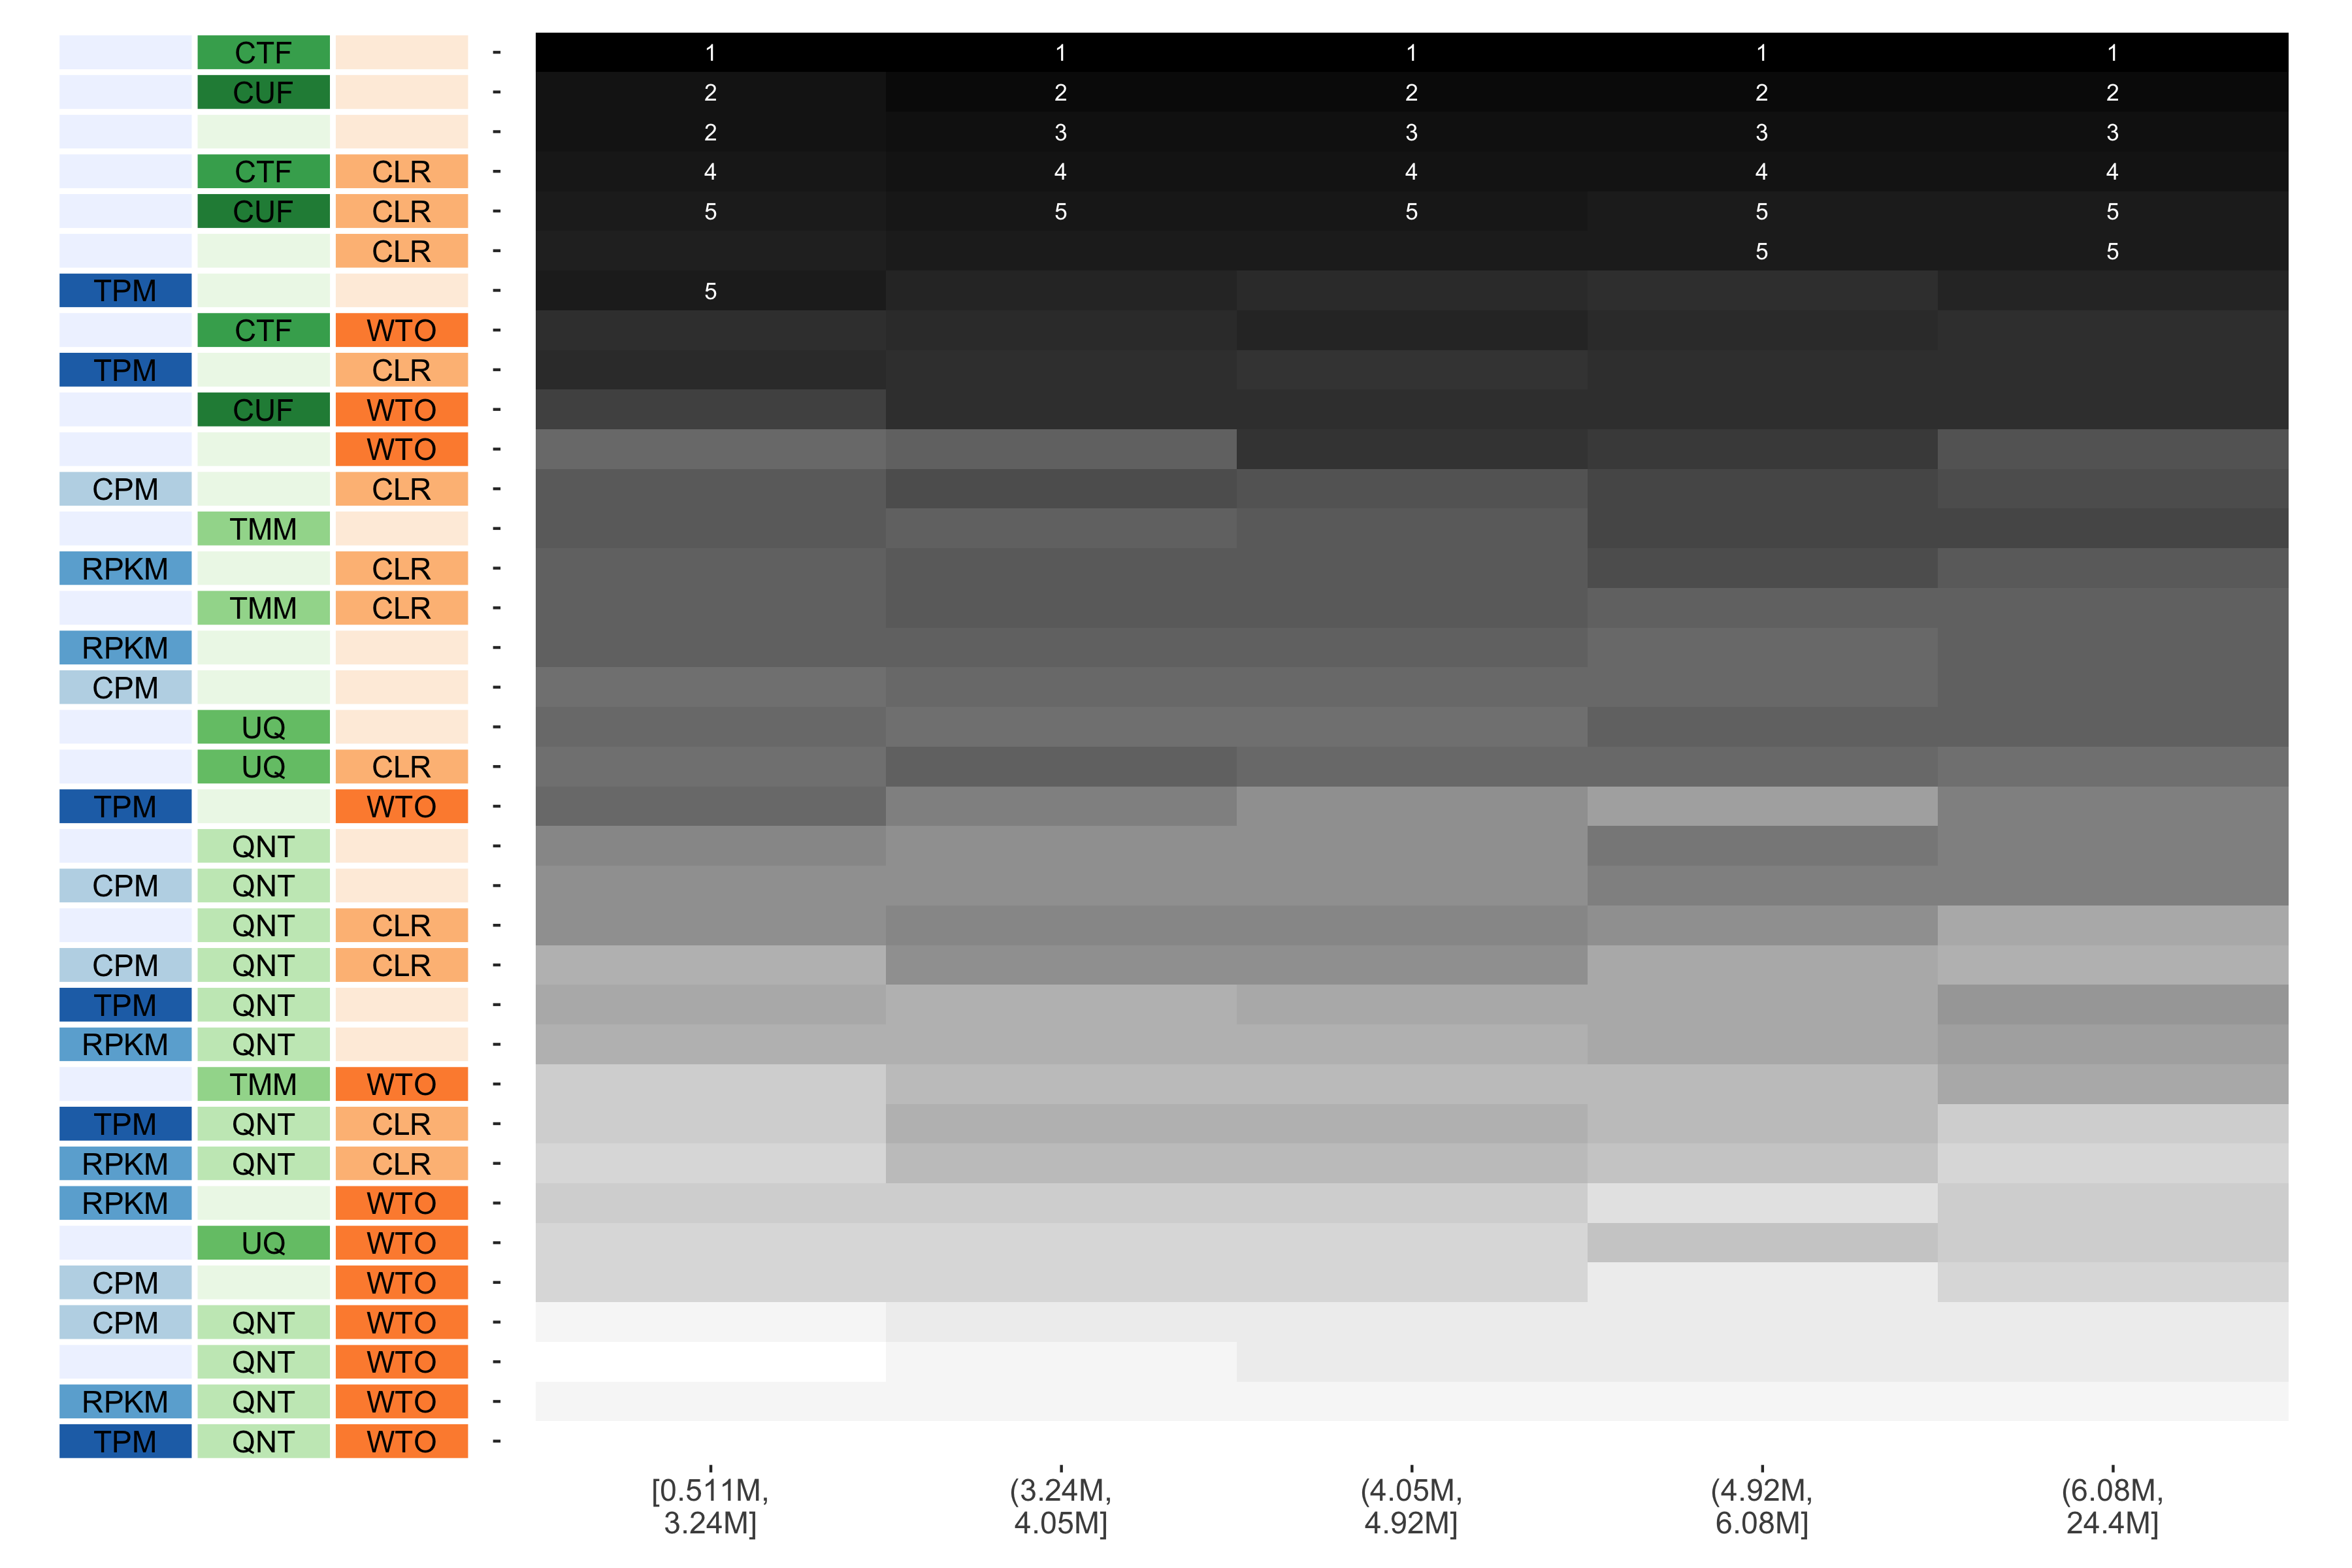 The heatmap shows the number of times (cell color) each workflow (row) outperforms other workflows as read count diversity varies (columns), when the resulting coexpression networks are evaluated based on the tissue-naive gold standard. The darkest colors indicate workflows that are significantly better than the most other workflows. In addition, the top 5 workflows in each column are marked with their rank, with ties given minimum rank.